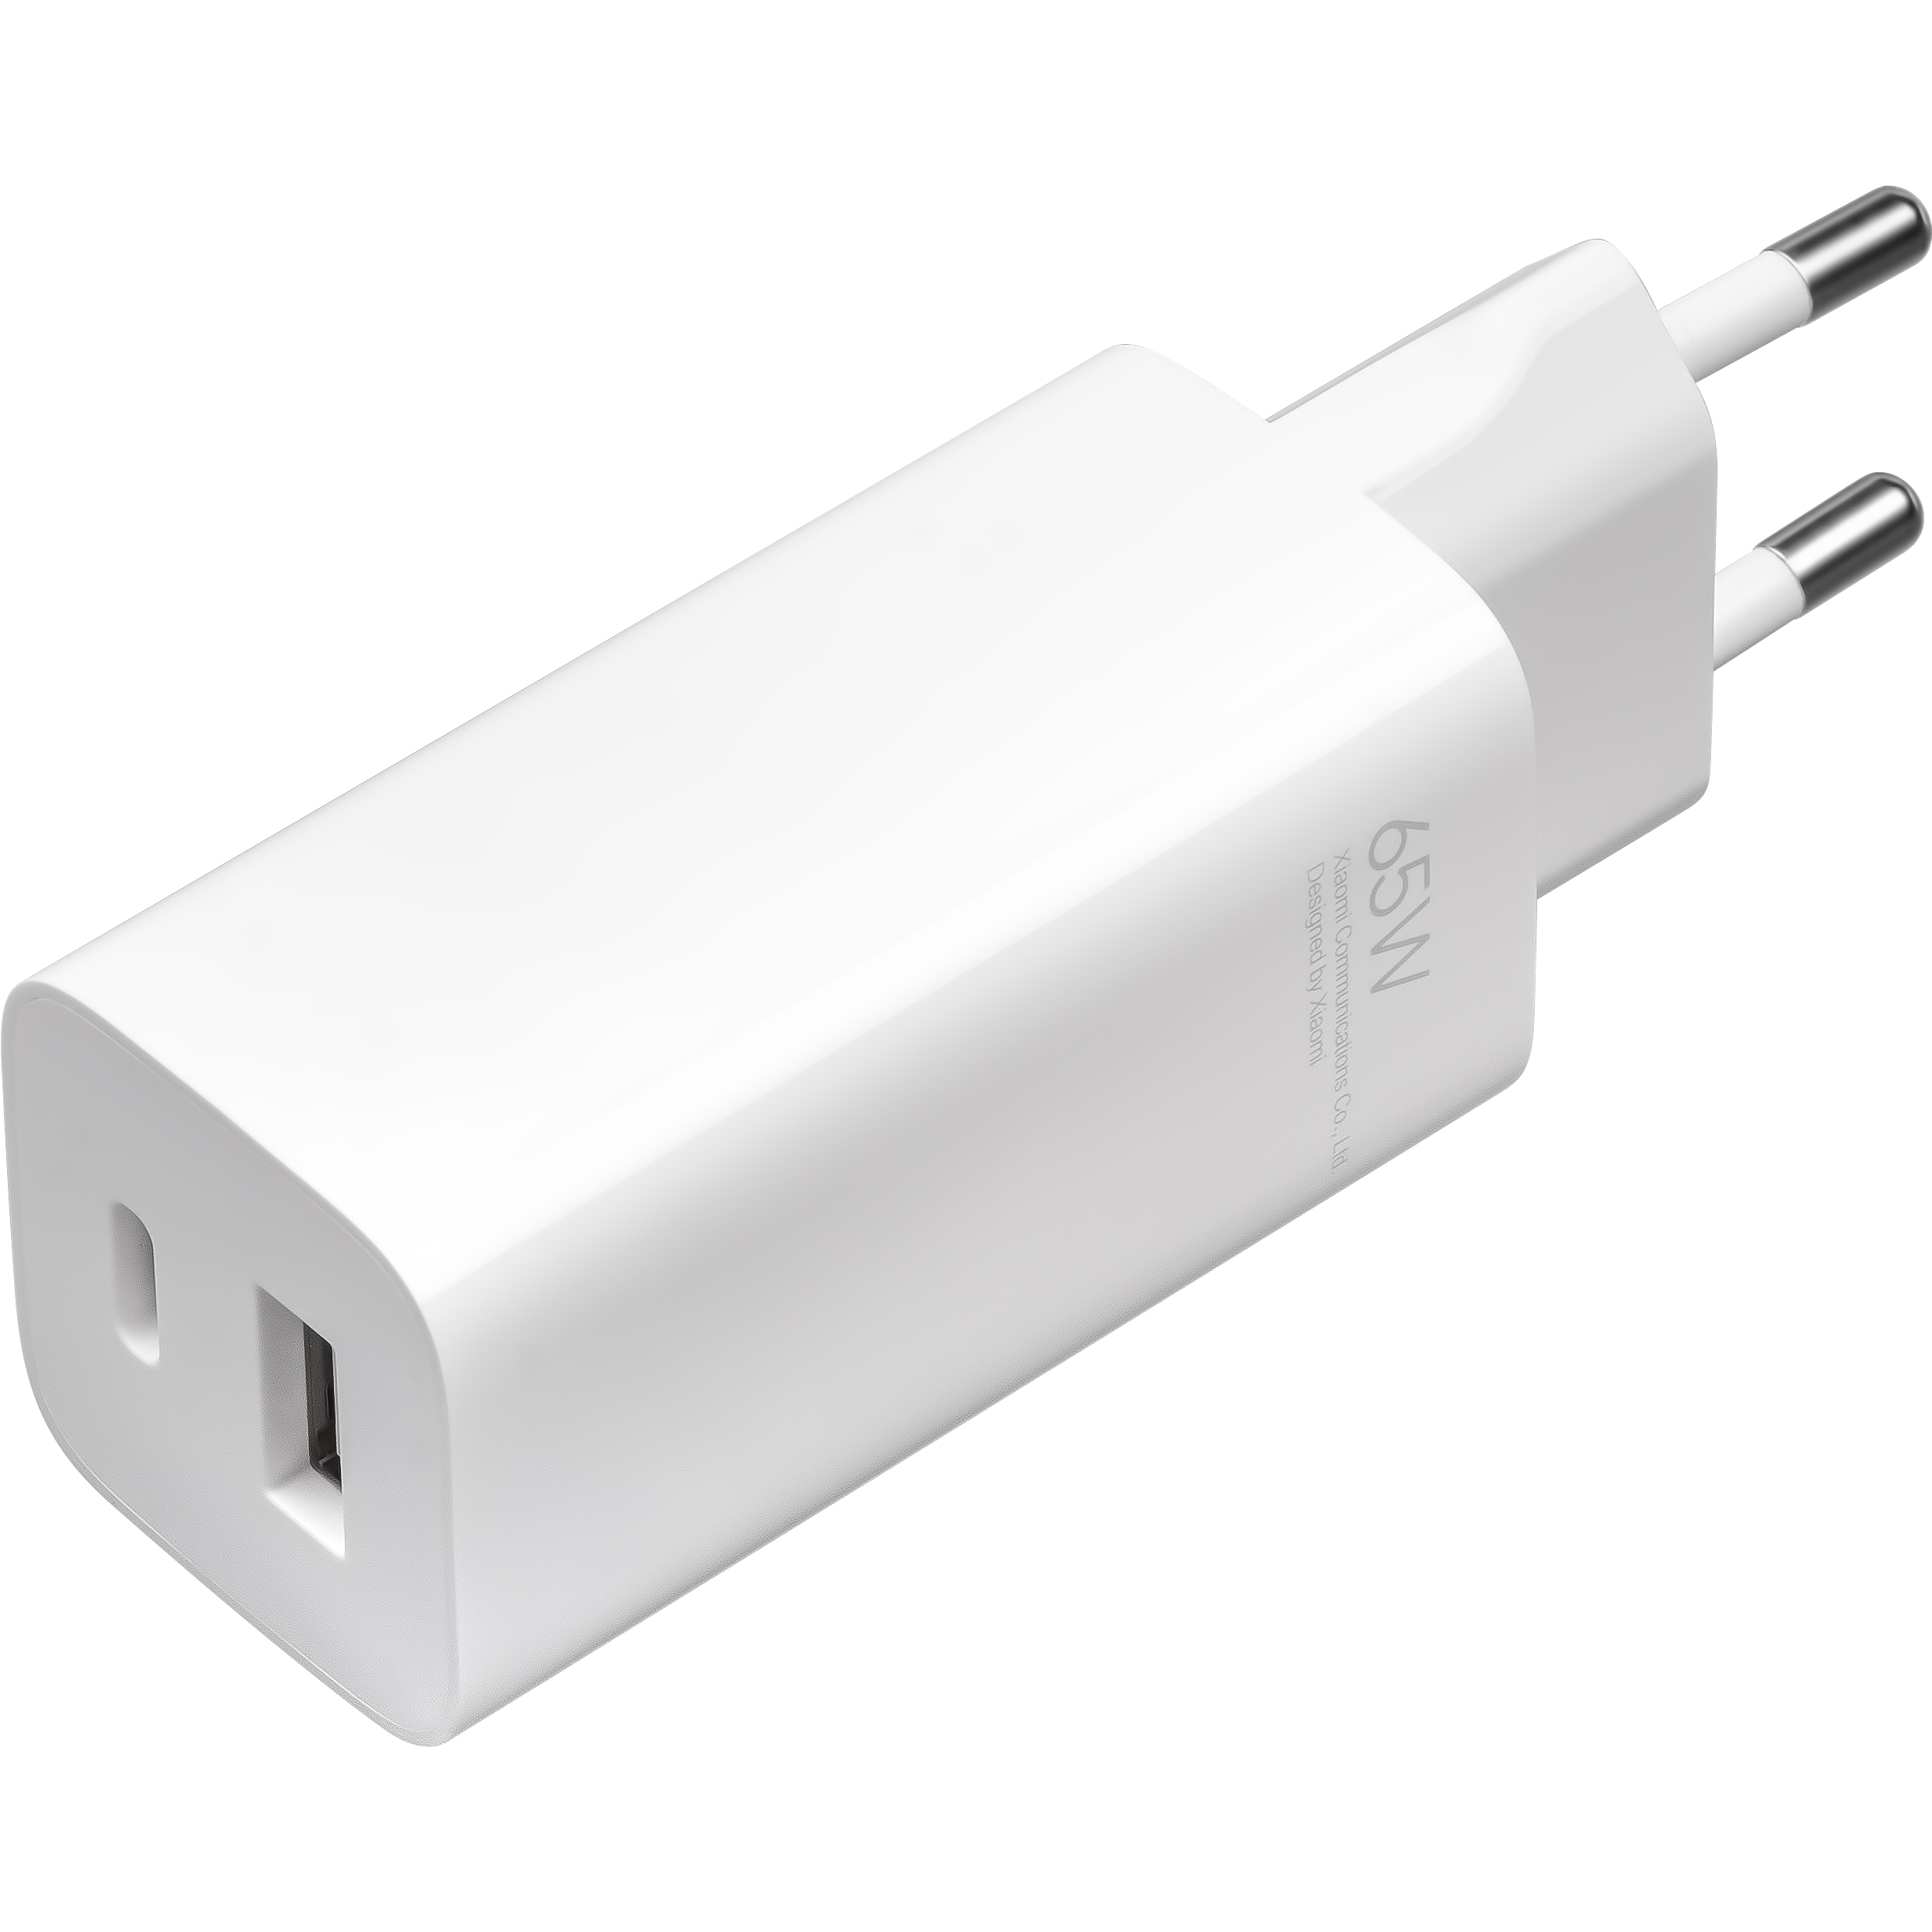 xiaomi-mi-travel-charger--28type-a--2B-type-c-29-65w-gan-tech-with-cable-white-bhr5515gl--28eu-blister-29